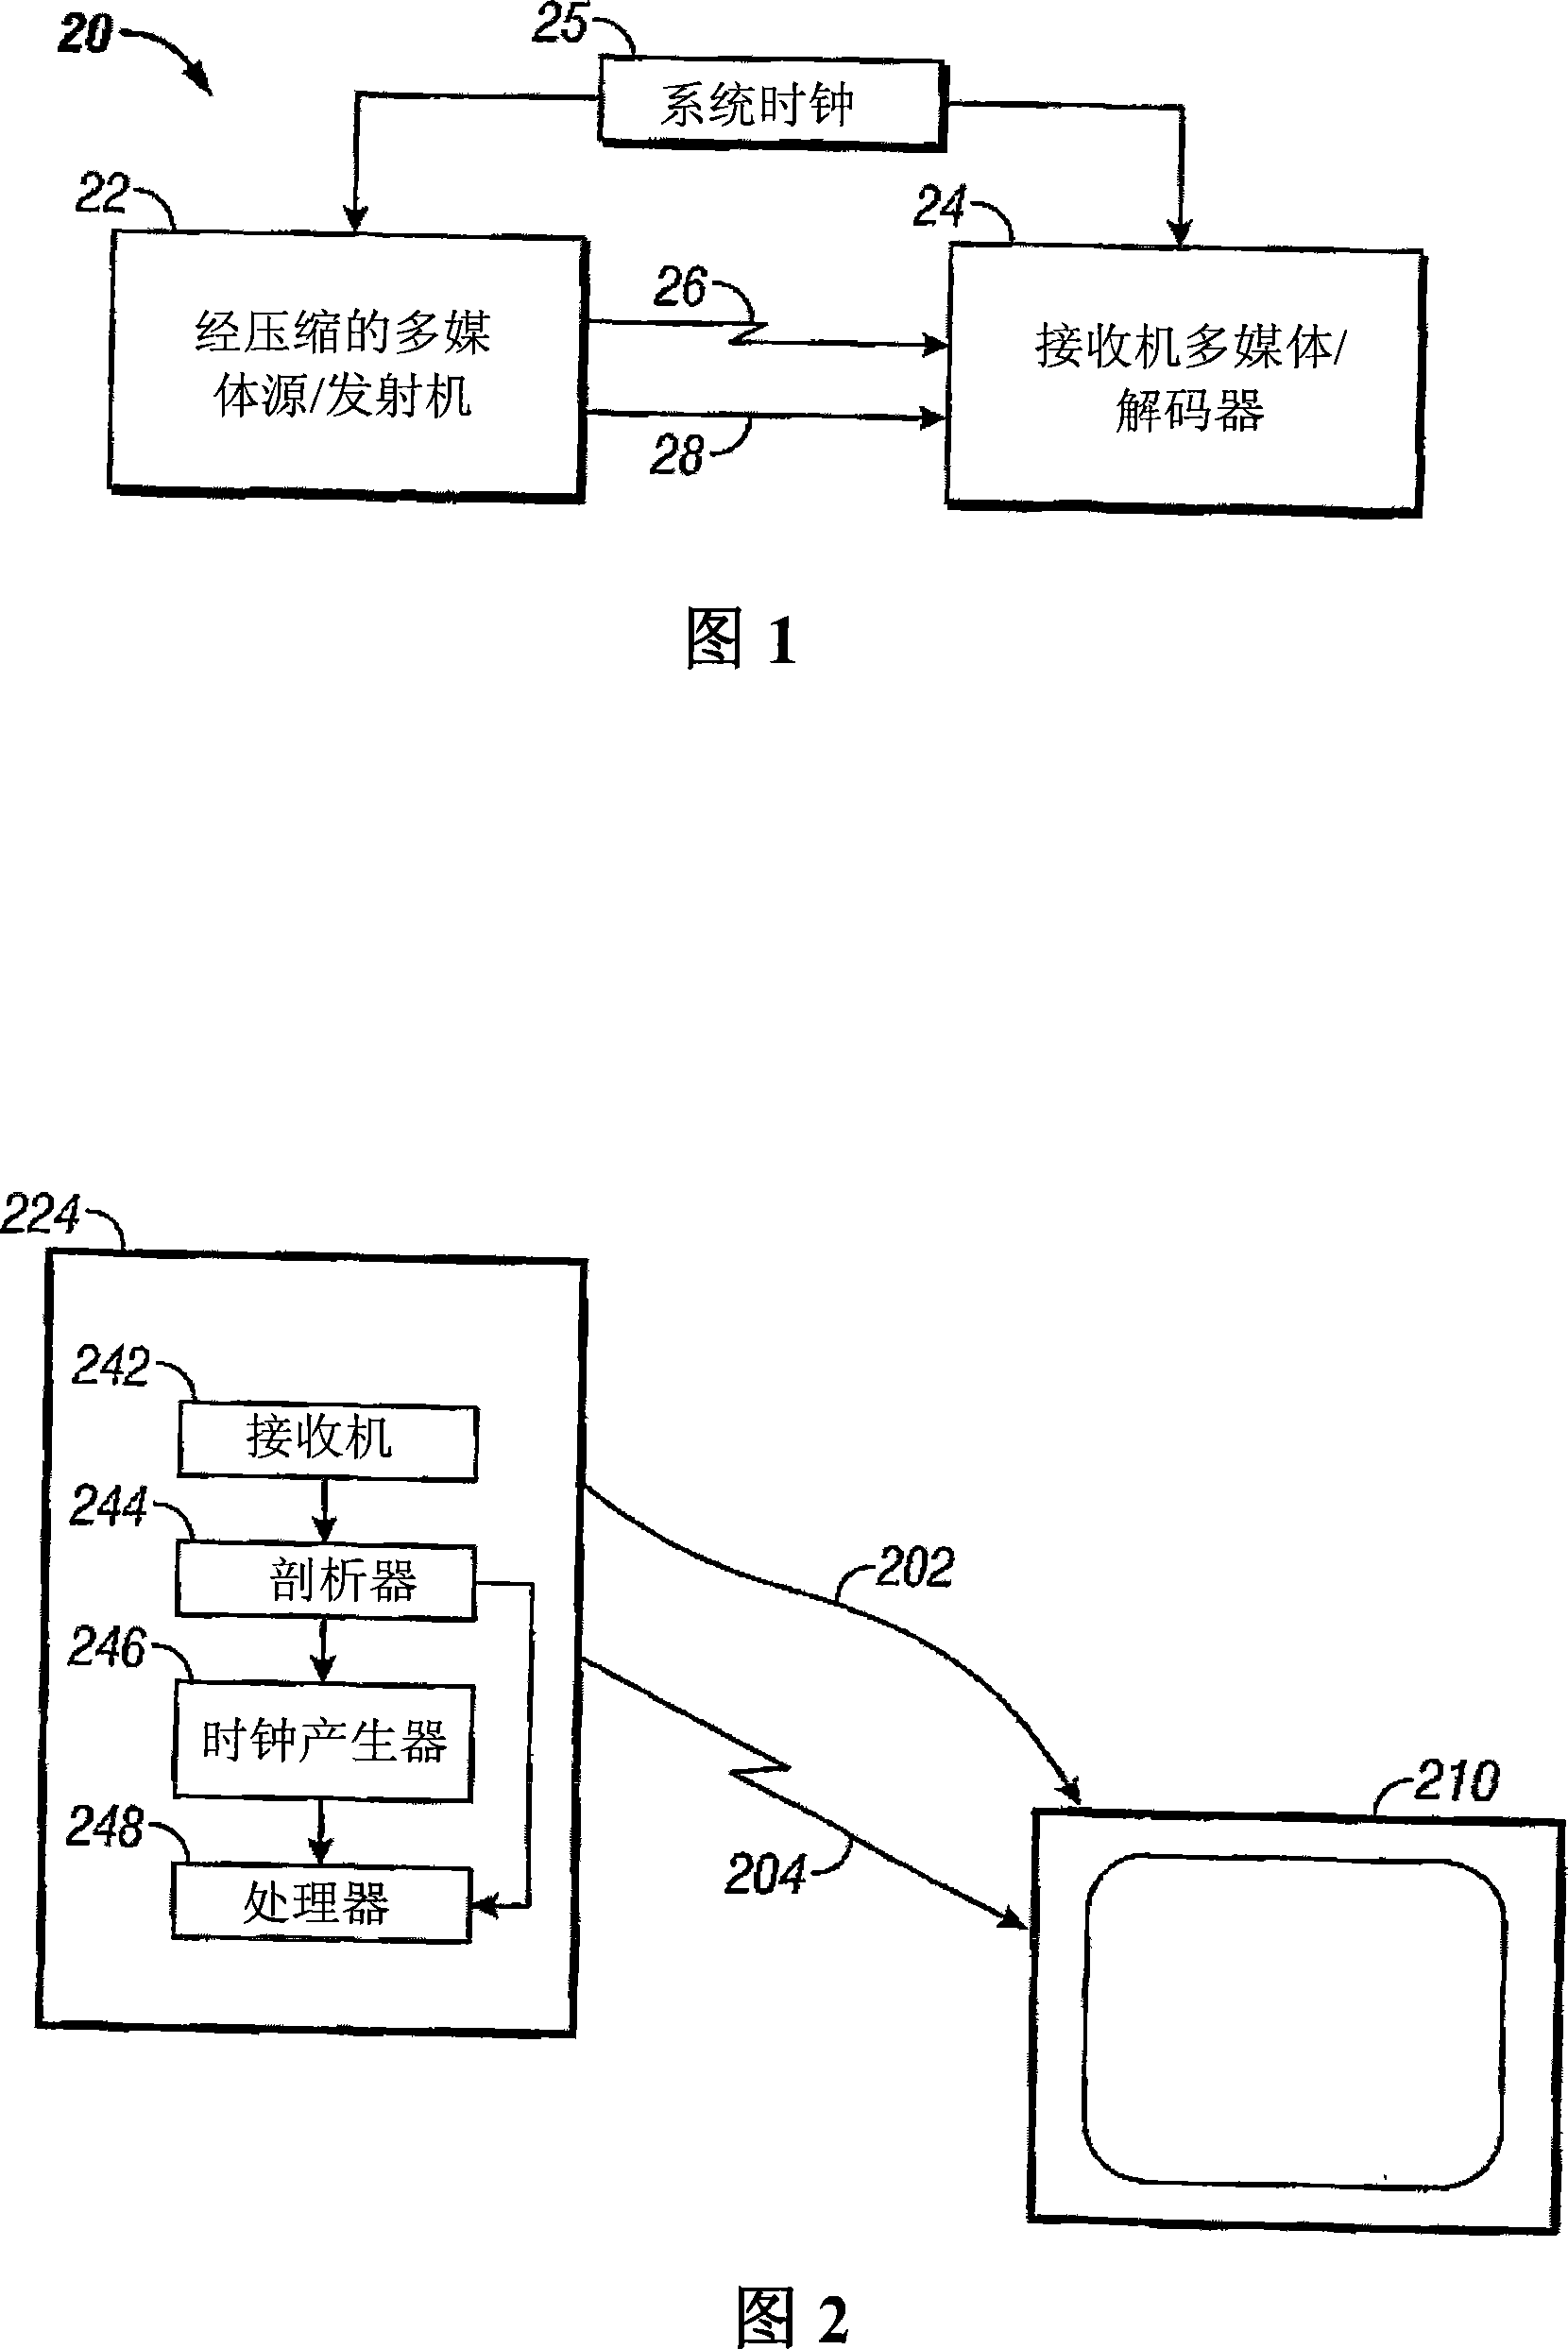 Time base reconstruction for converting discrete time labeled video into analog output signal